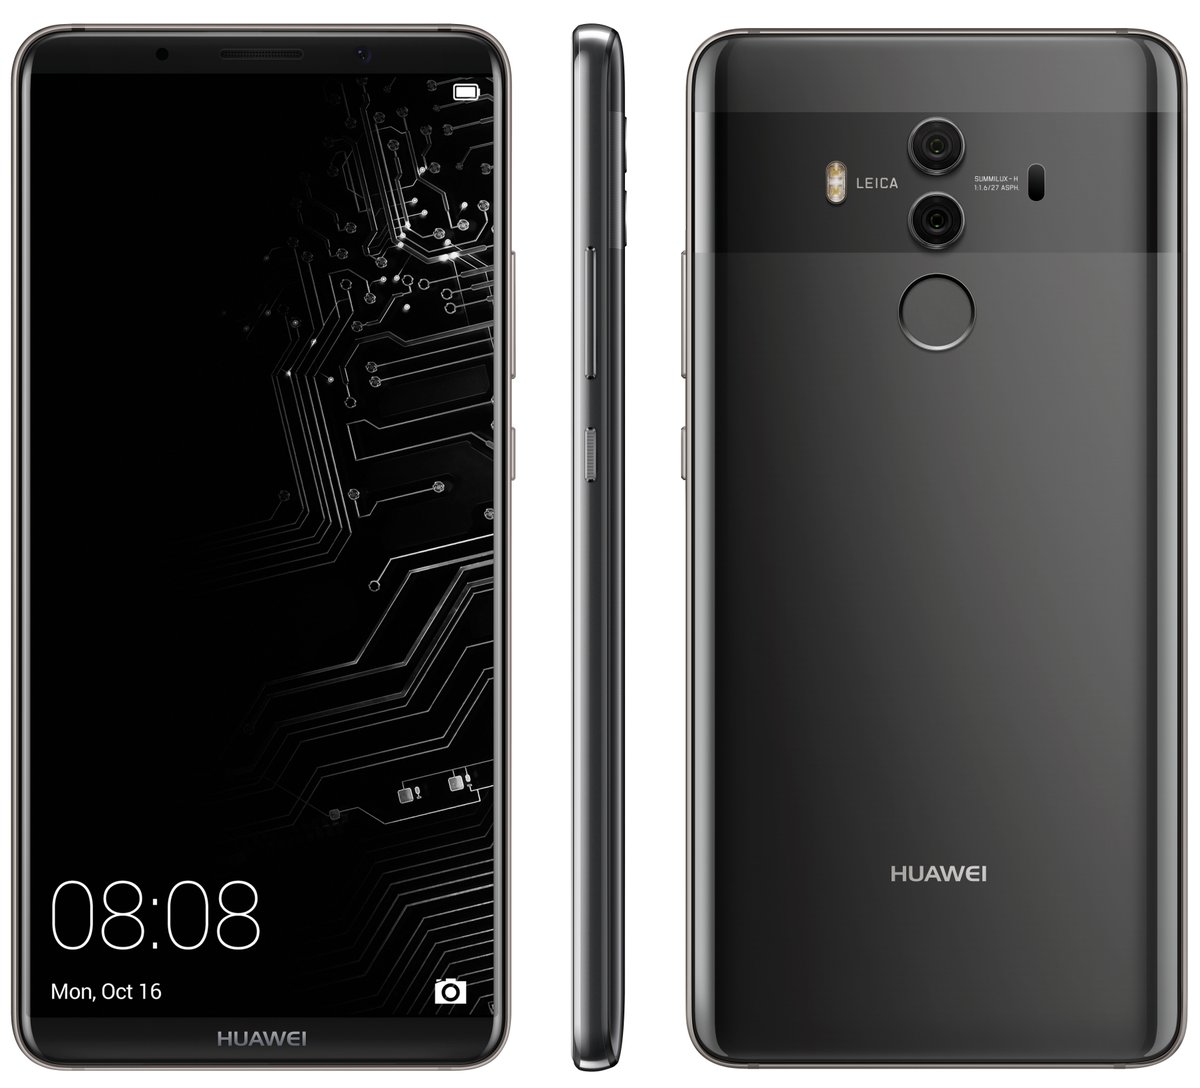 Reiziger praktijk Haast je More Huawei Mate 10 Pro images leak ahead of official reveal -  NotebookCheck.net News